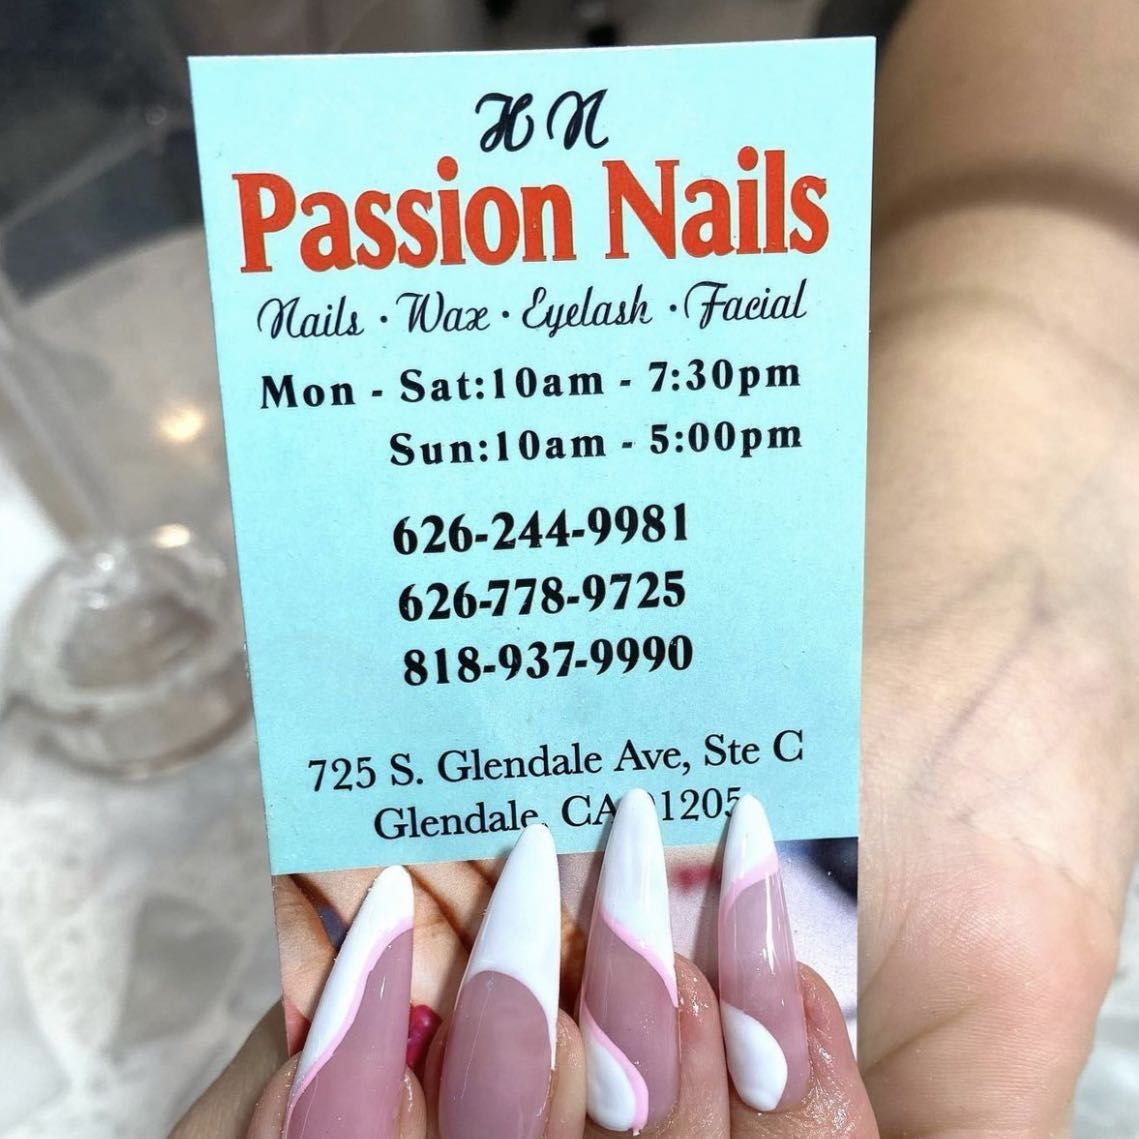 HN Passion Nails - Glendale - Book Online - Prices, Reviews, Photos